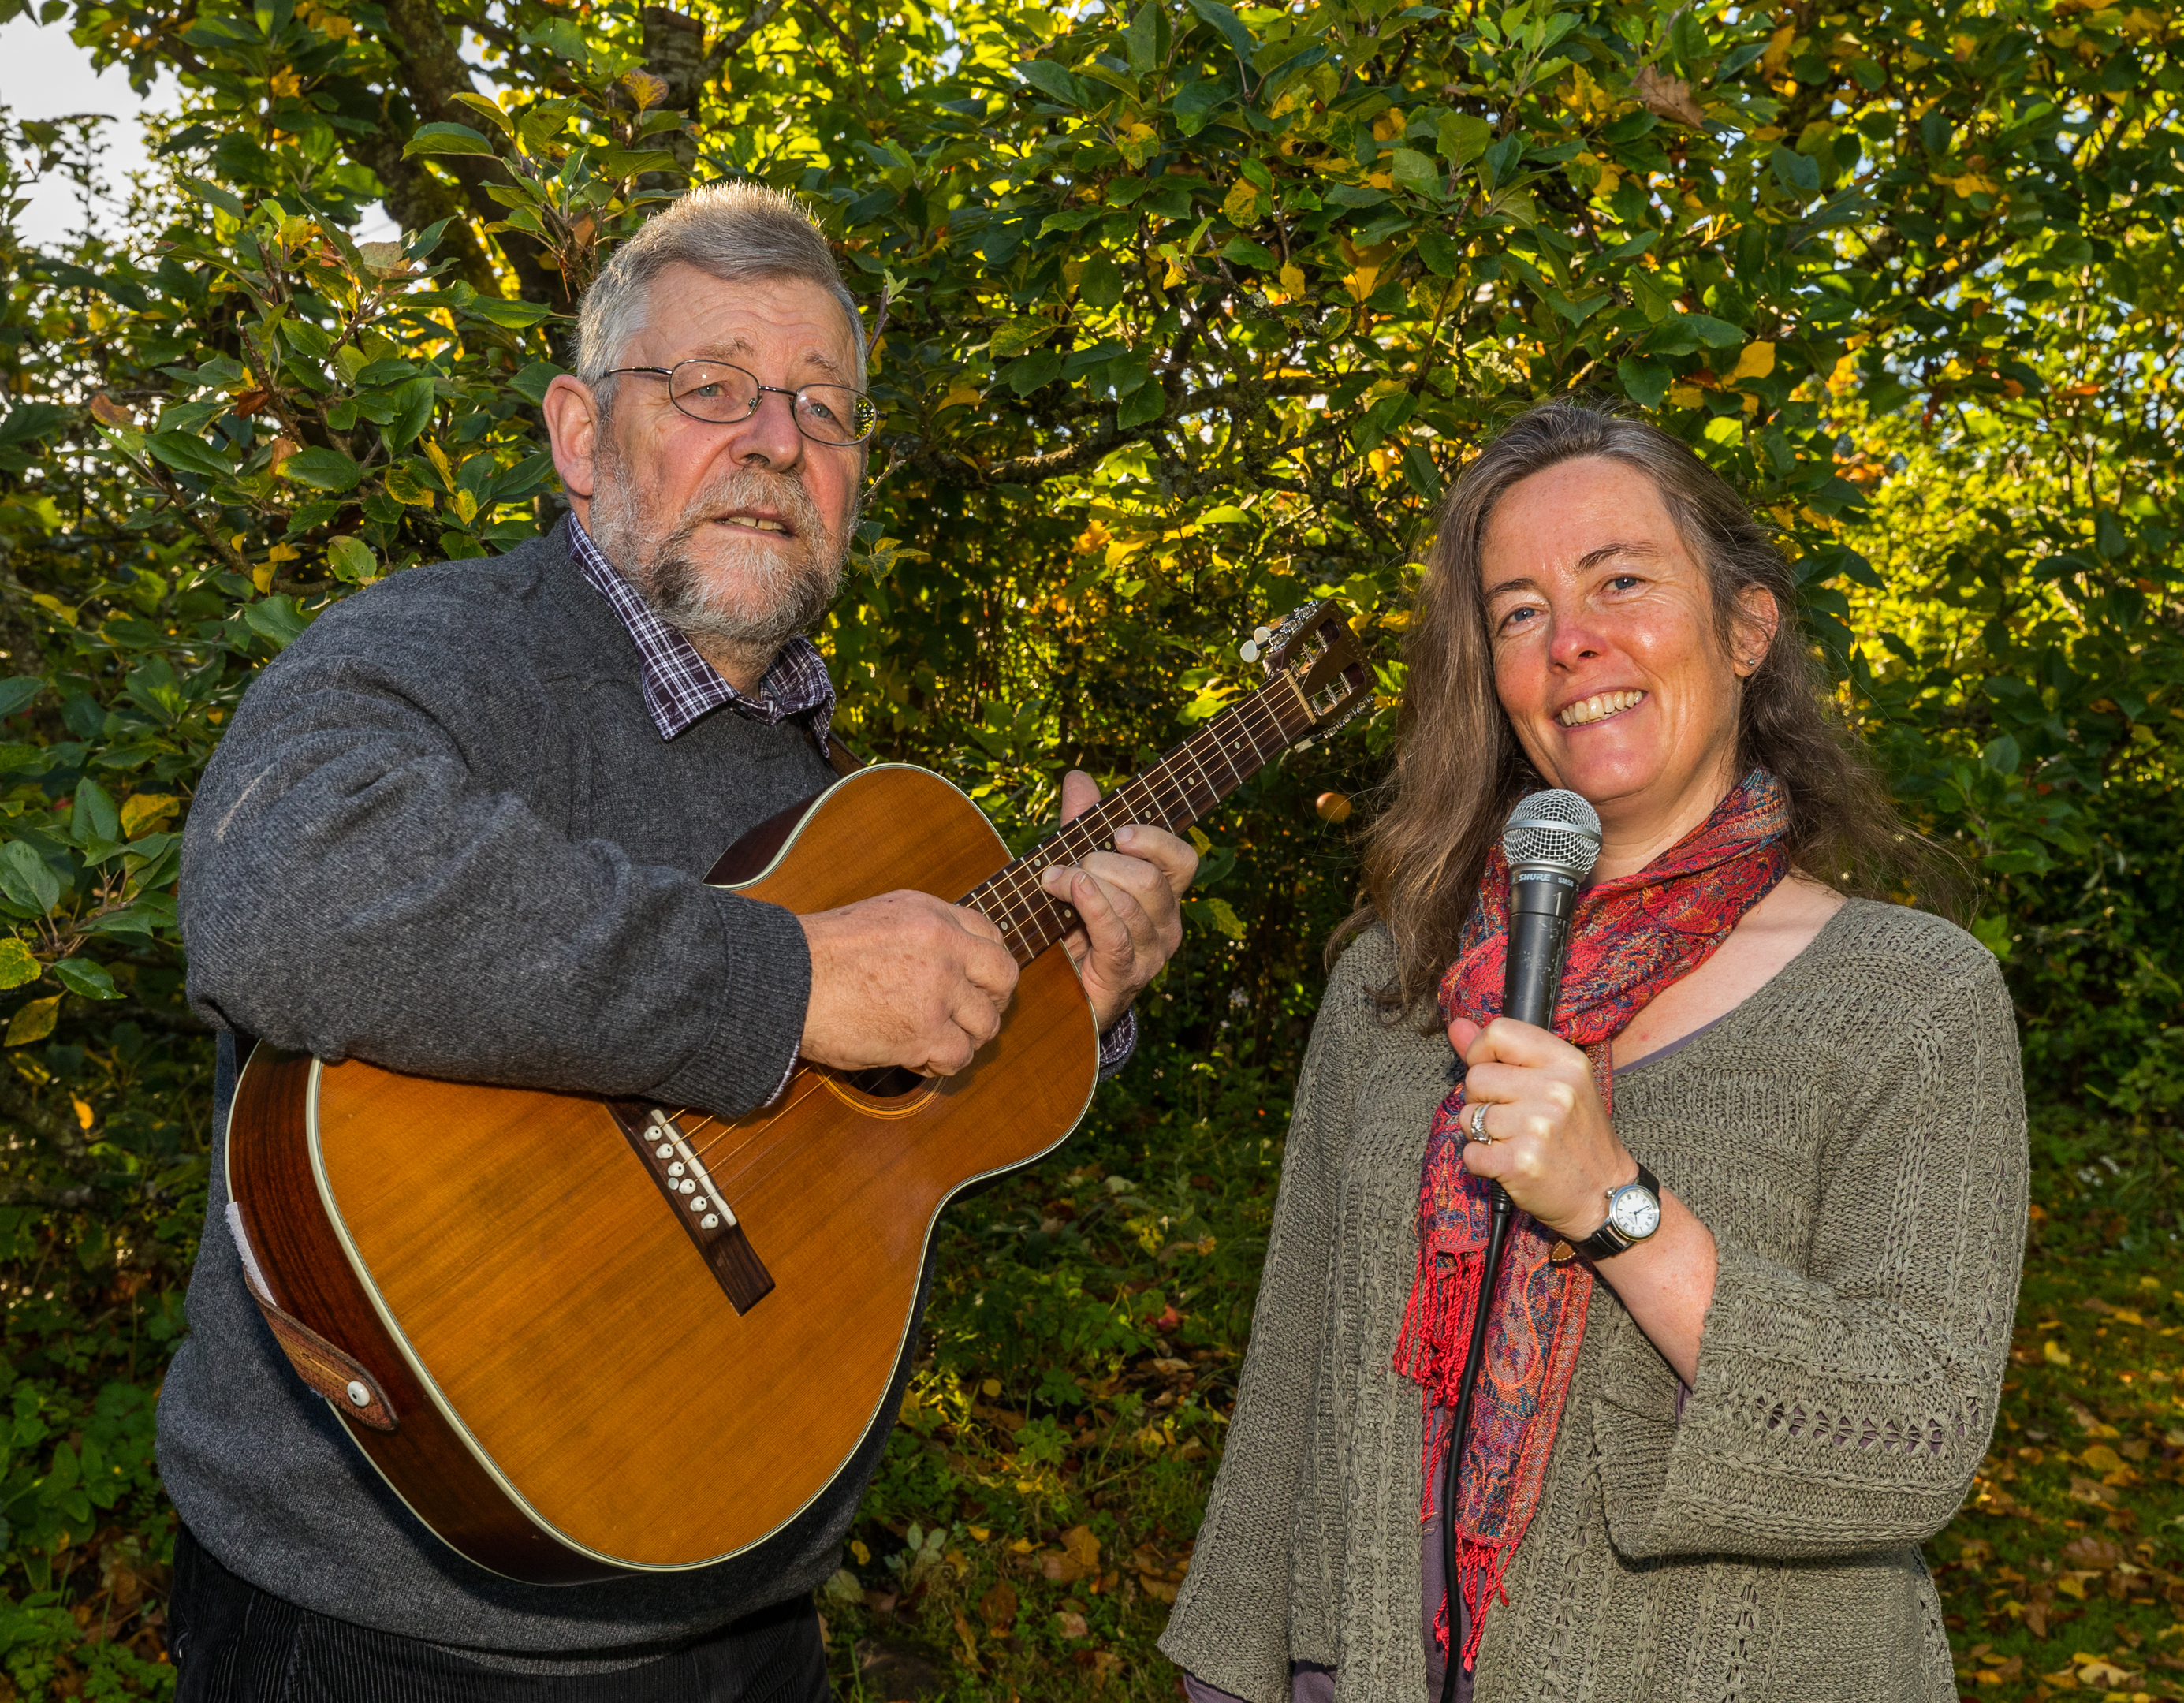 L-R Jerry Akehurst Guitarist and Abi Rooley-Towle singer